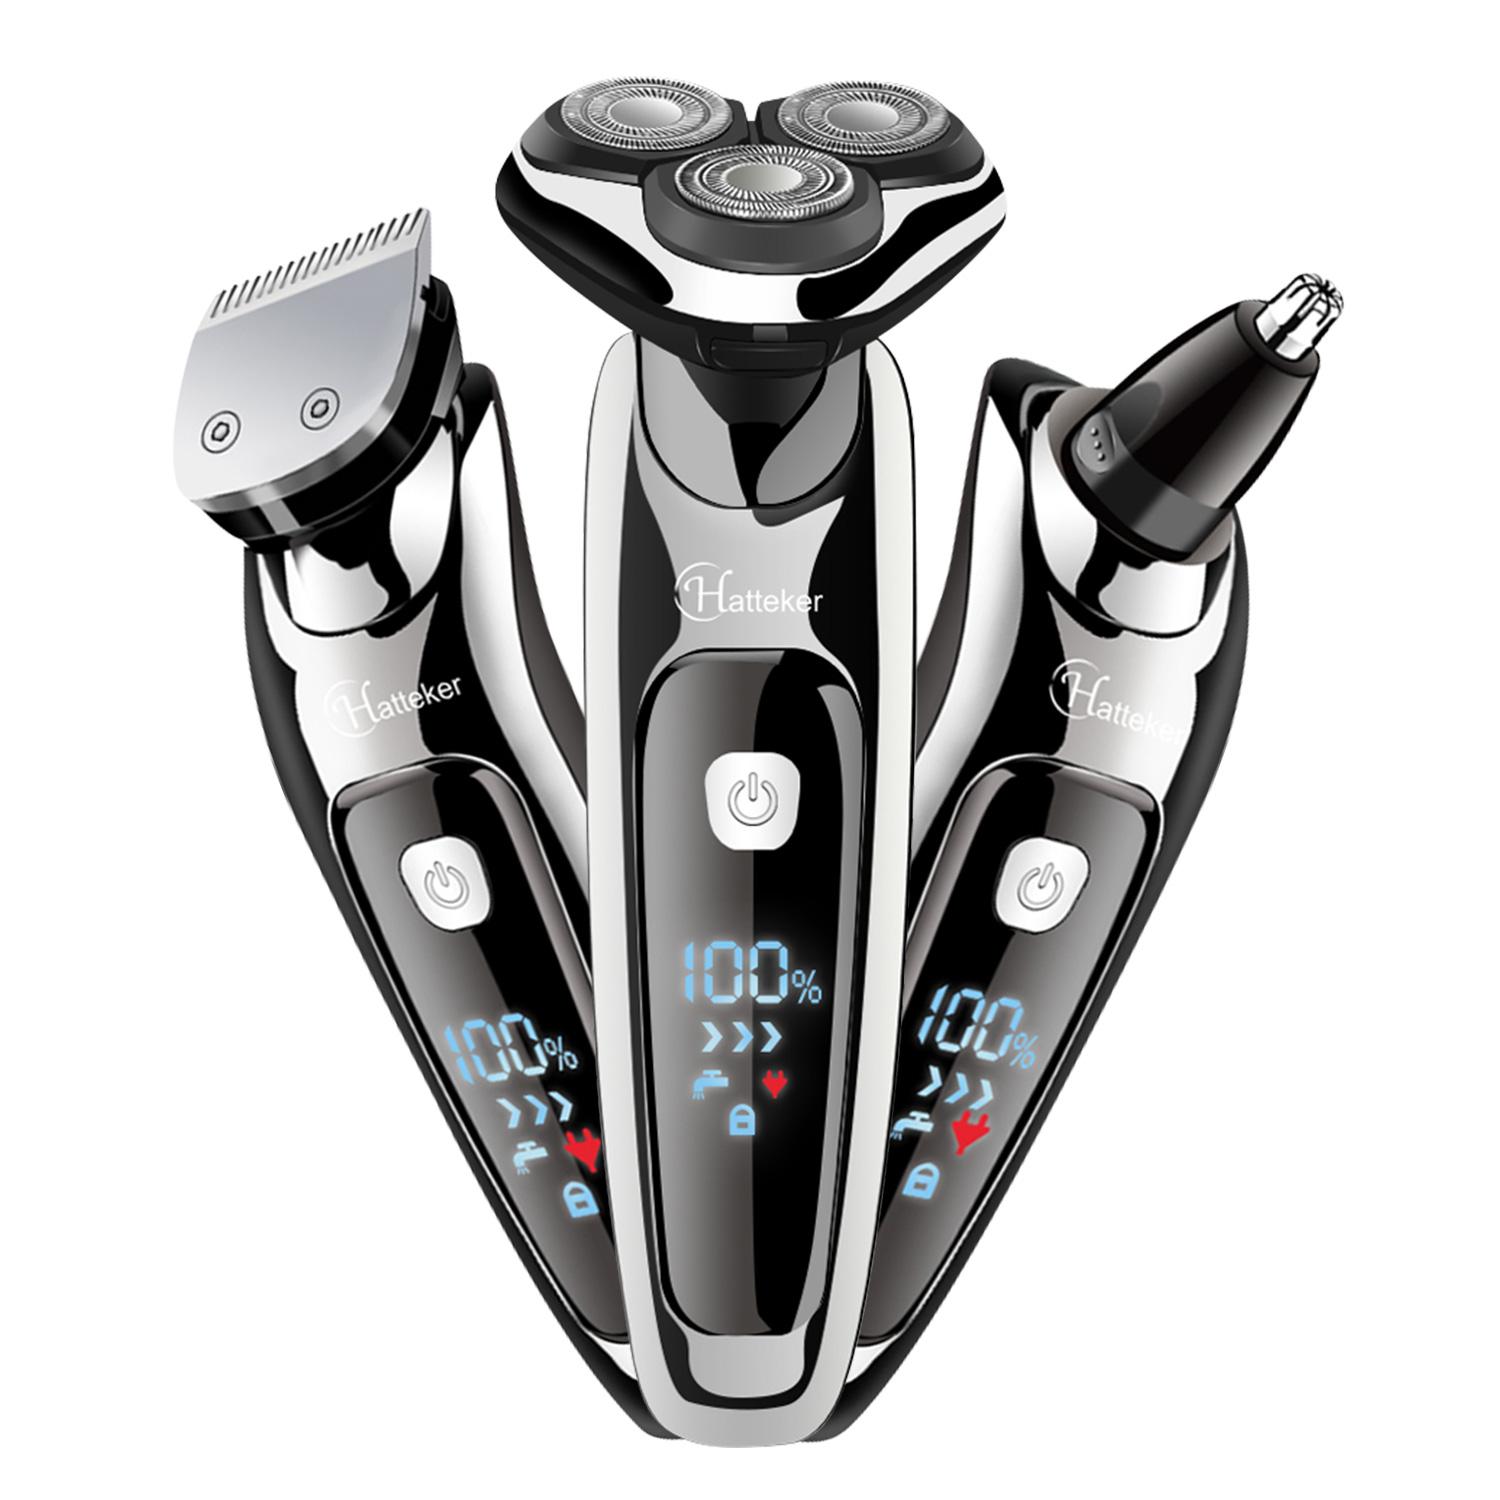 HATTEKER Electric Shaver Rechargeable Cordless Hair Clippers Electric Razor for Men 3 in 1 Grooming Kit Shaving Machine